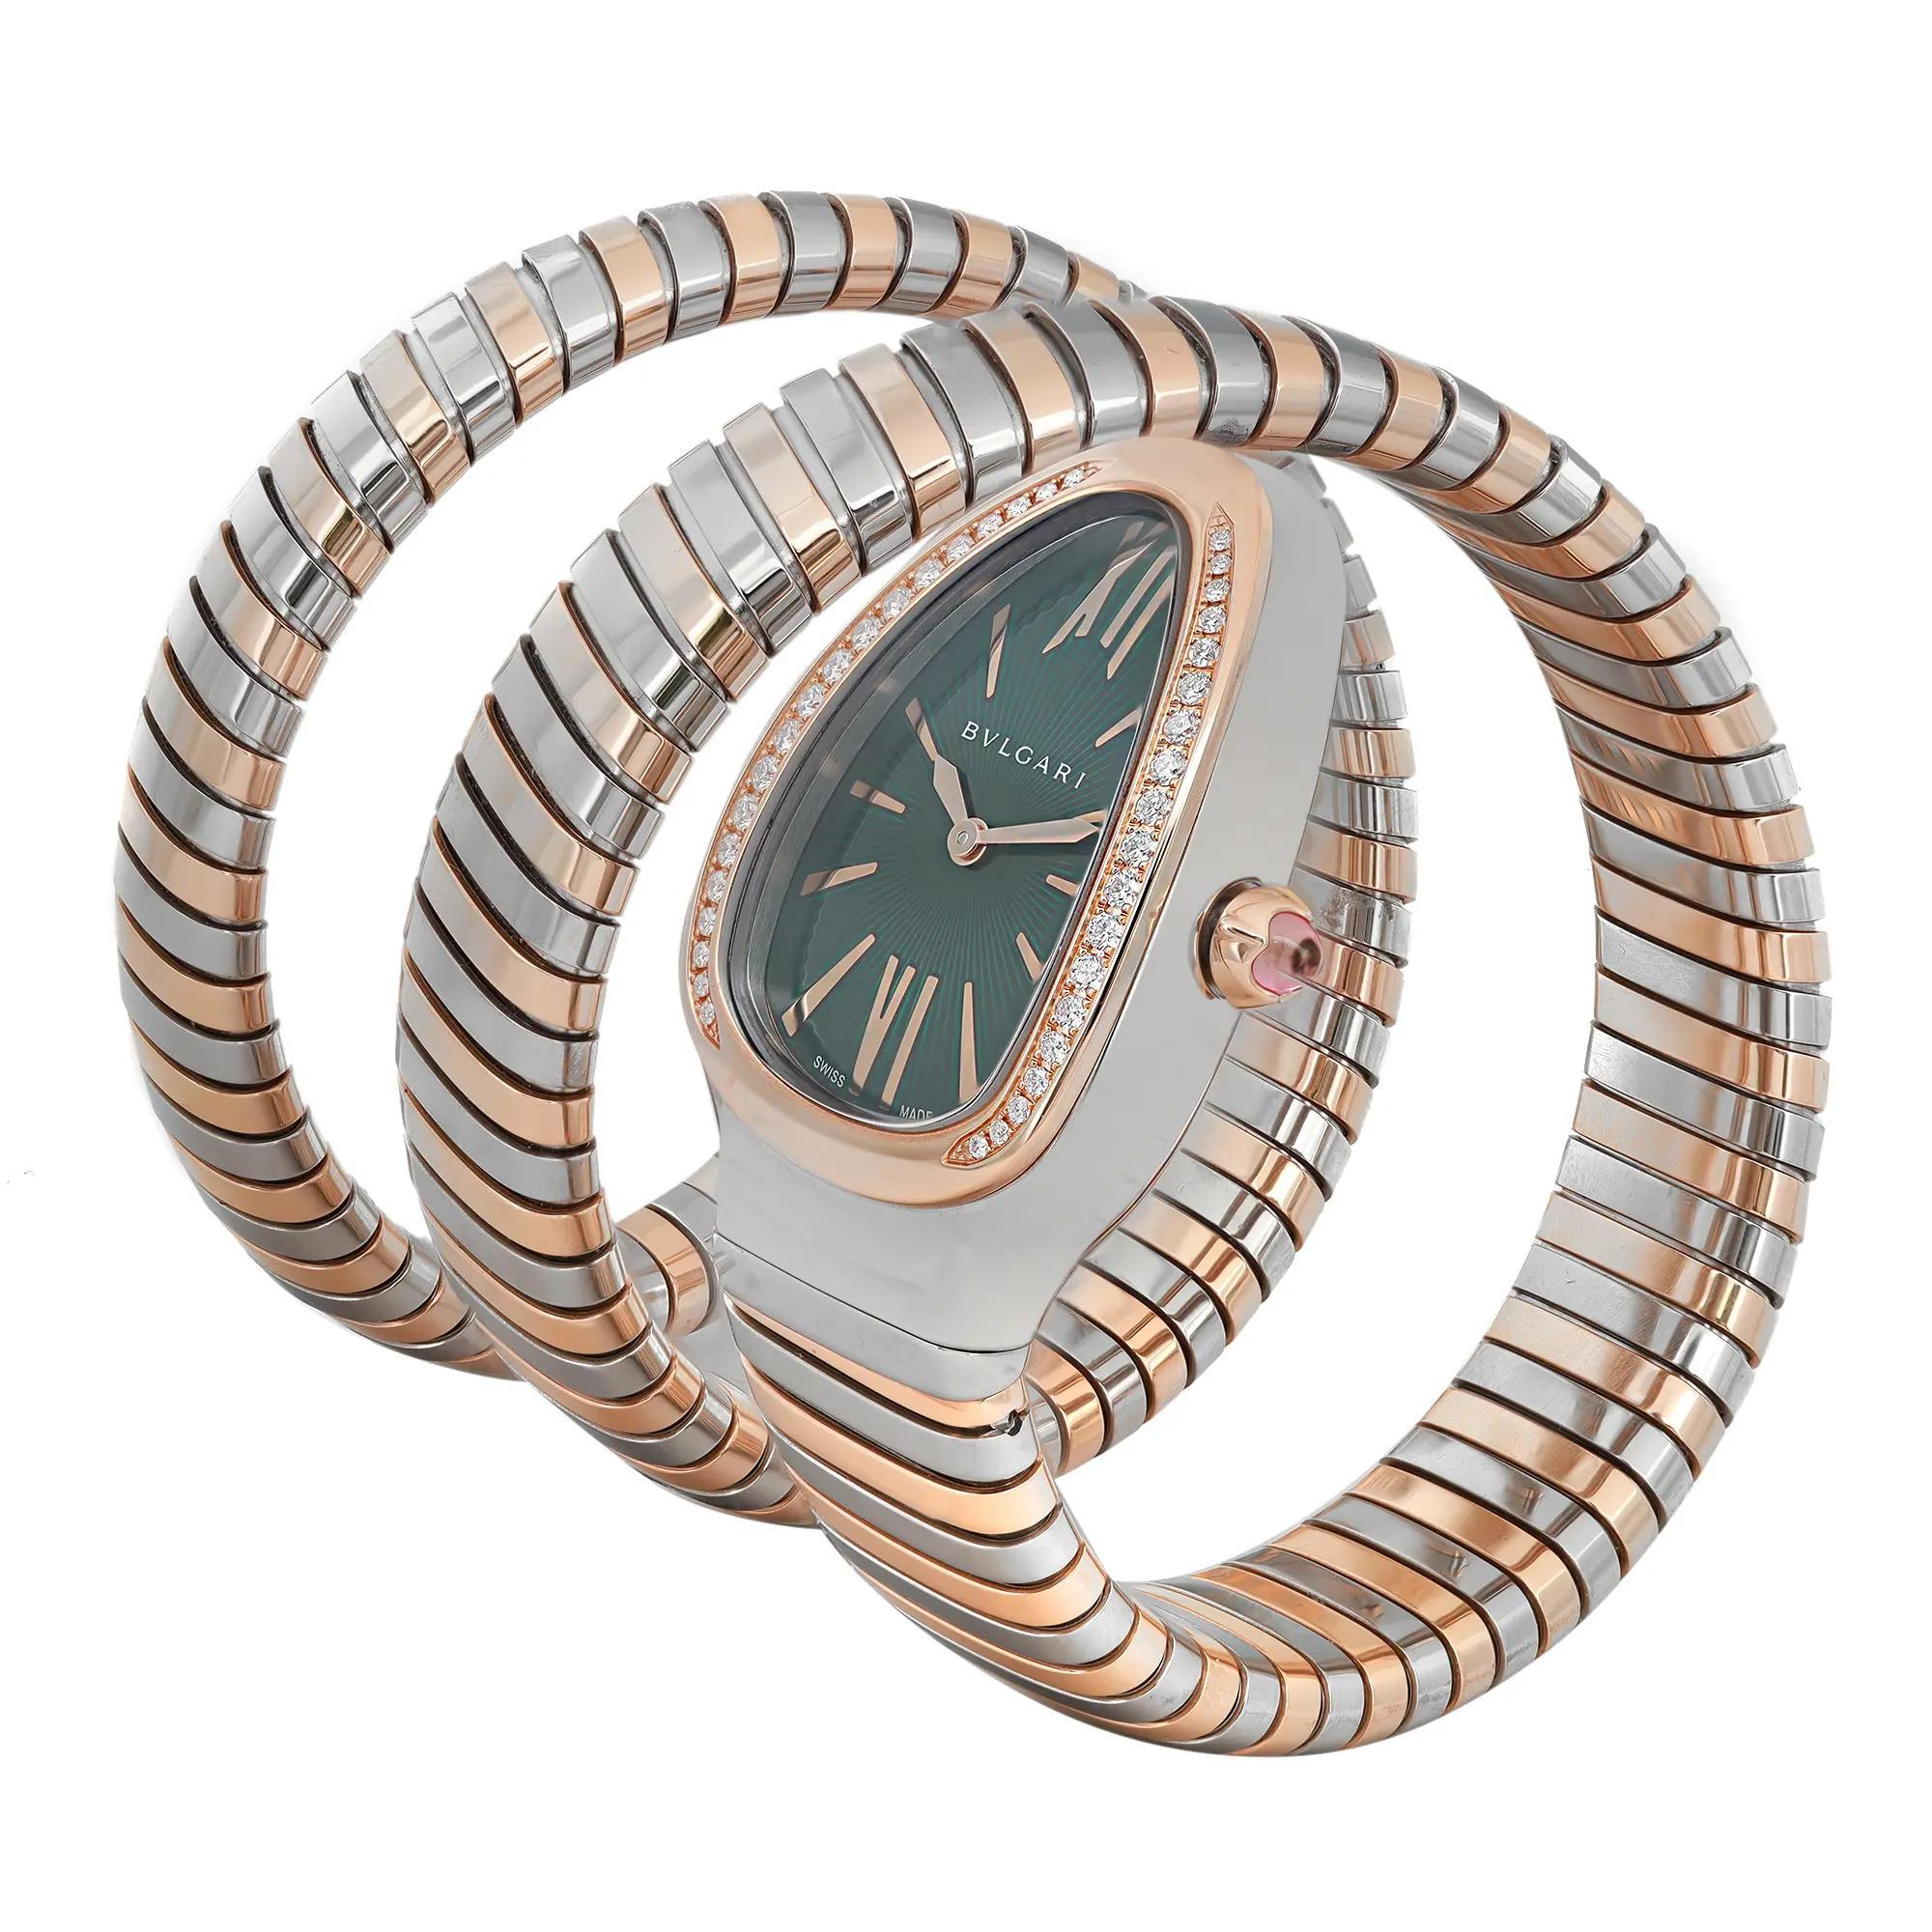 New. Comes with the original box and papers.

Brand: Bvlgari
Model Number: 102791
Department: Women
Country/Region of Manufacture: Switzerland
Style: Luxury
Model Name: Bvlgari Serpenti Tubogas
Vintage: No

Movement:
Type: Quartz
Caliber: